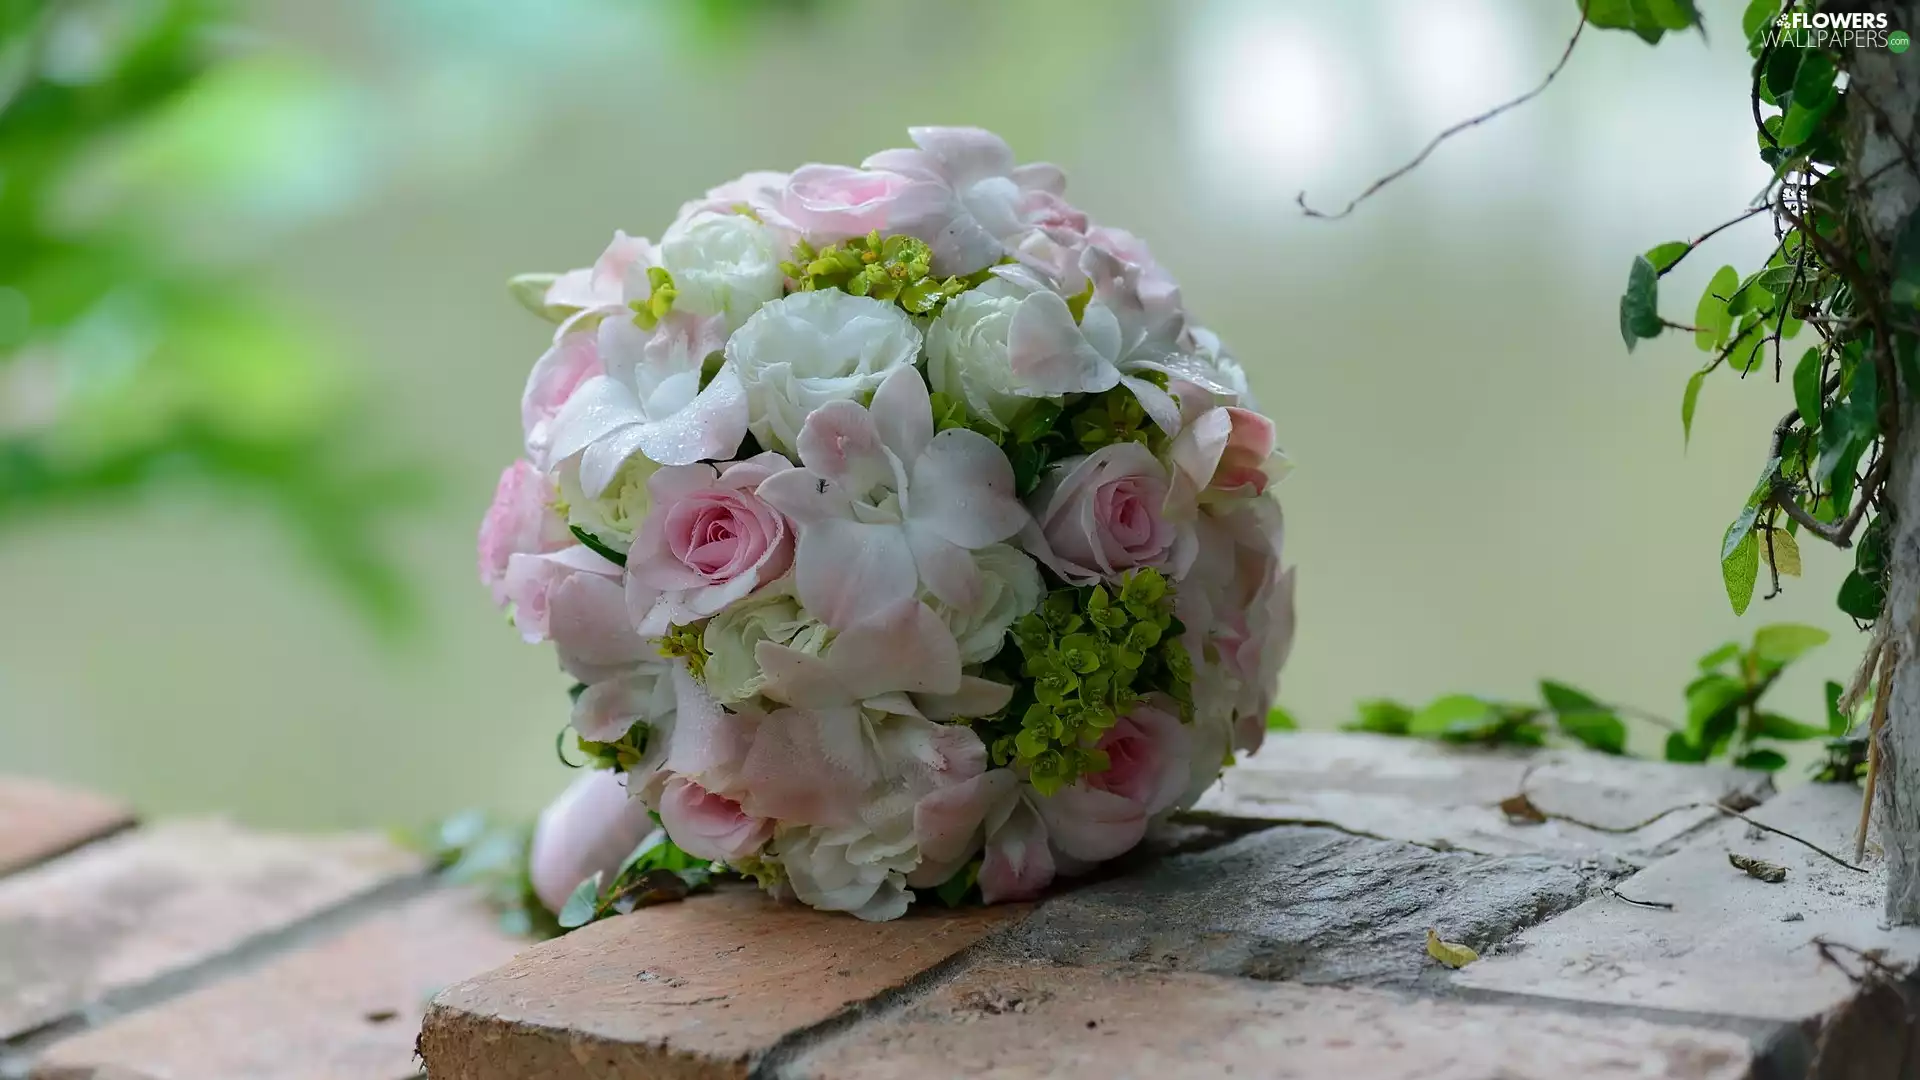 wedded, Flowers, roses, ledge, Orb, bouquet